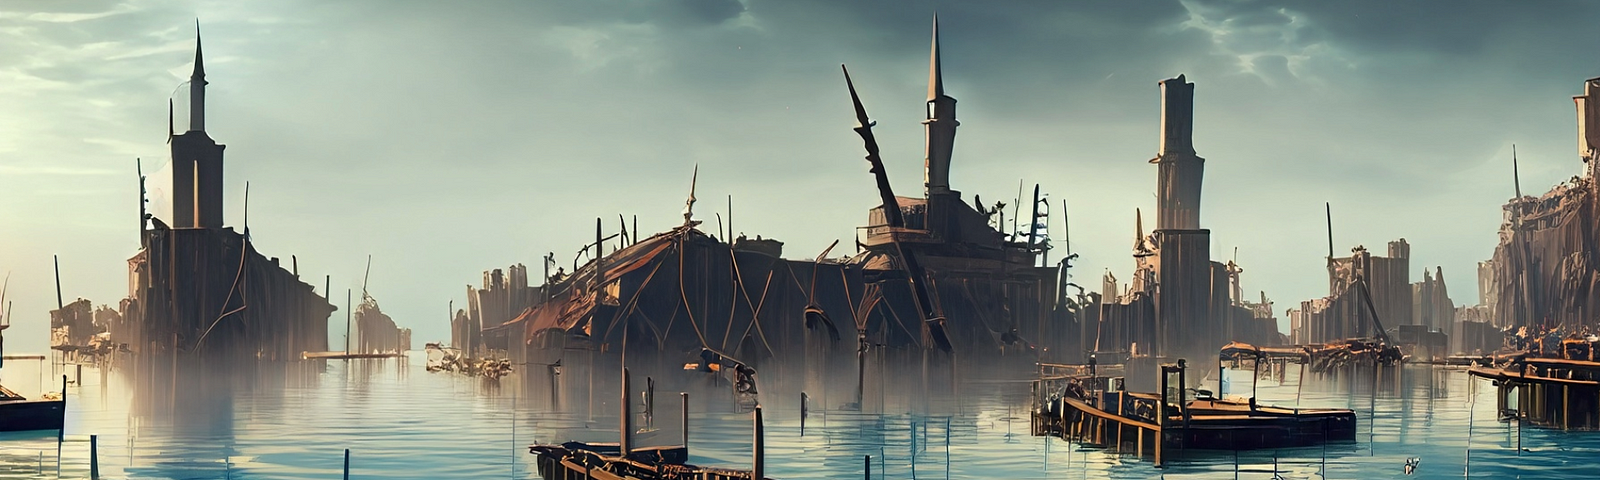 A city messily made from wood is surrounded by water.